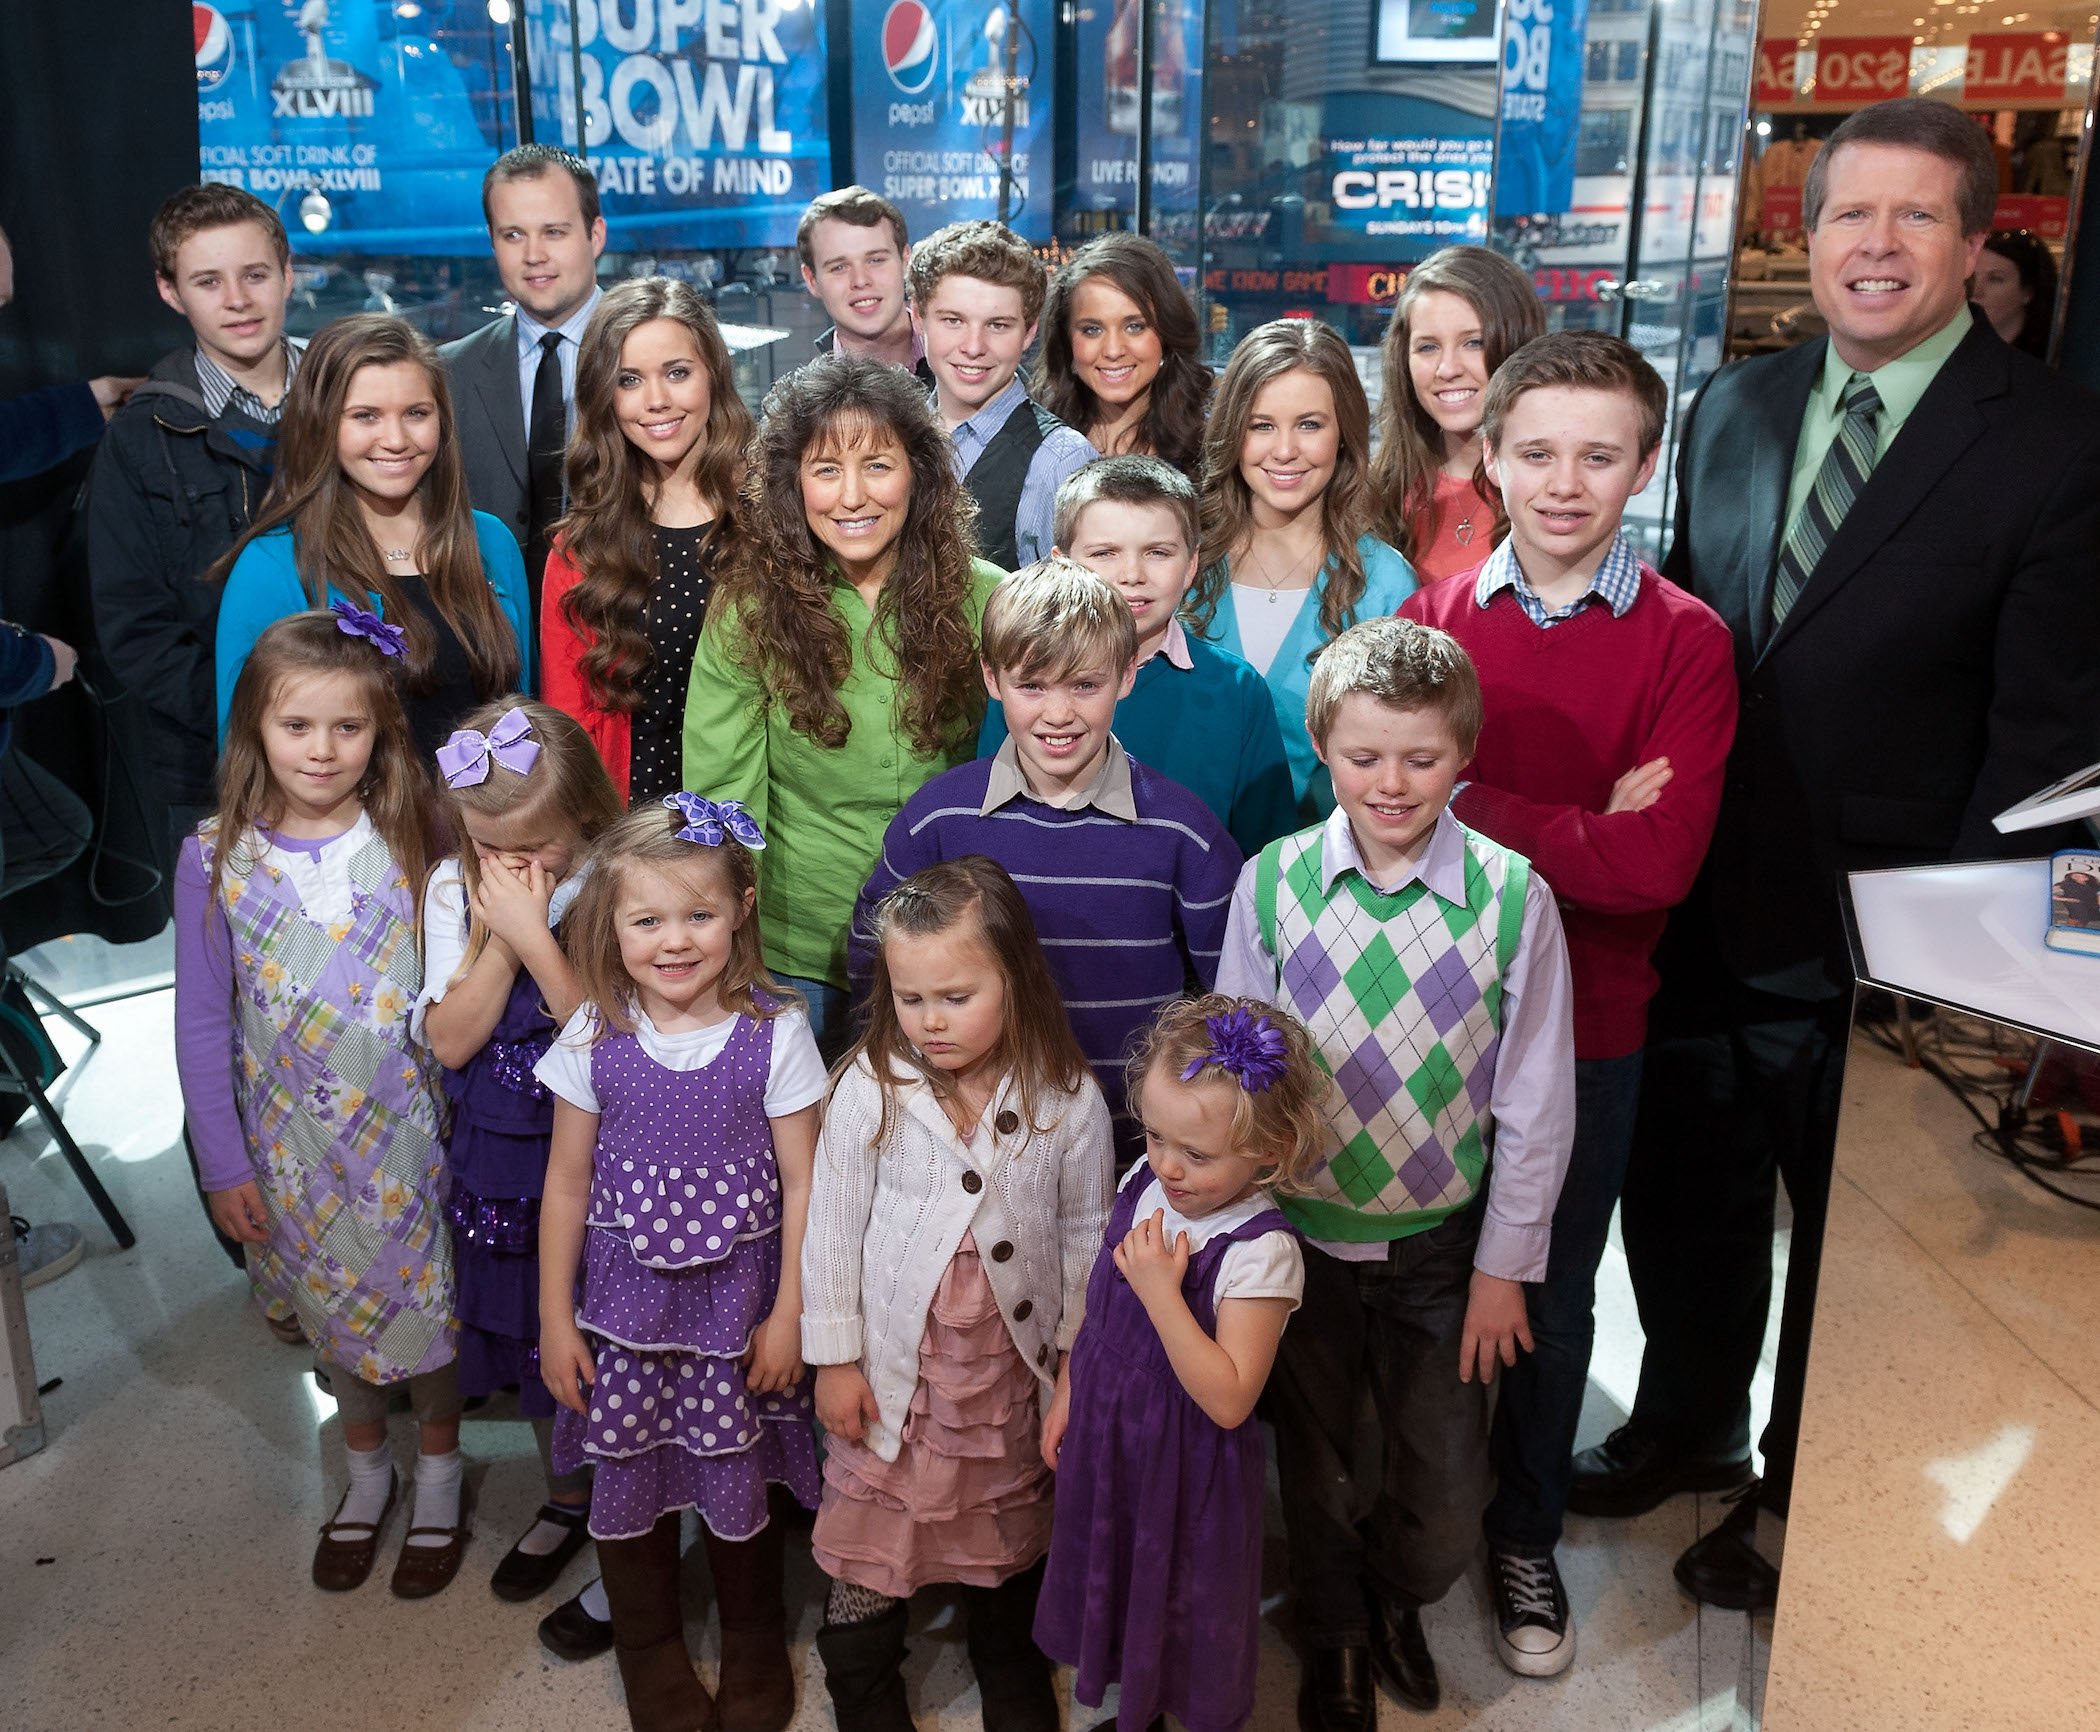 The Duggar family from TLC's 'Counting On' standing together on the set of 'Extra'